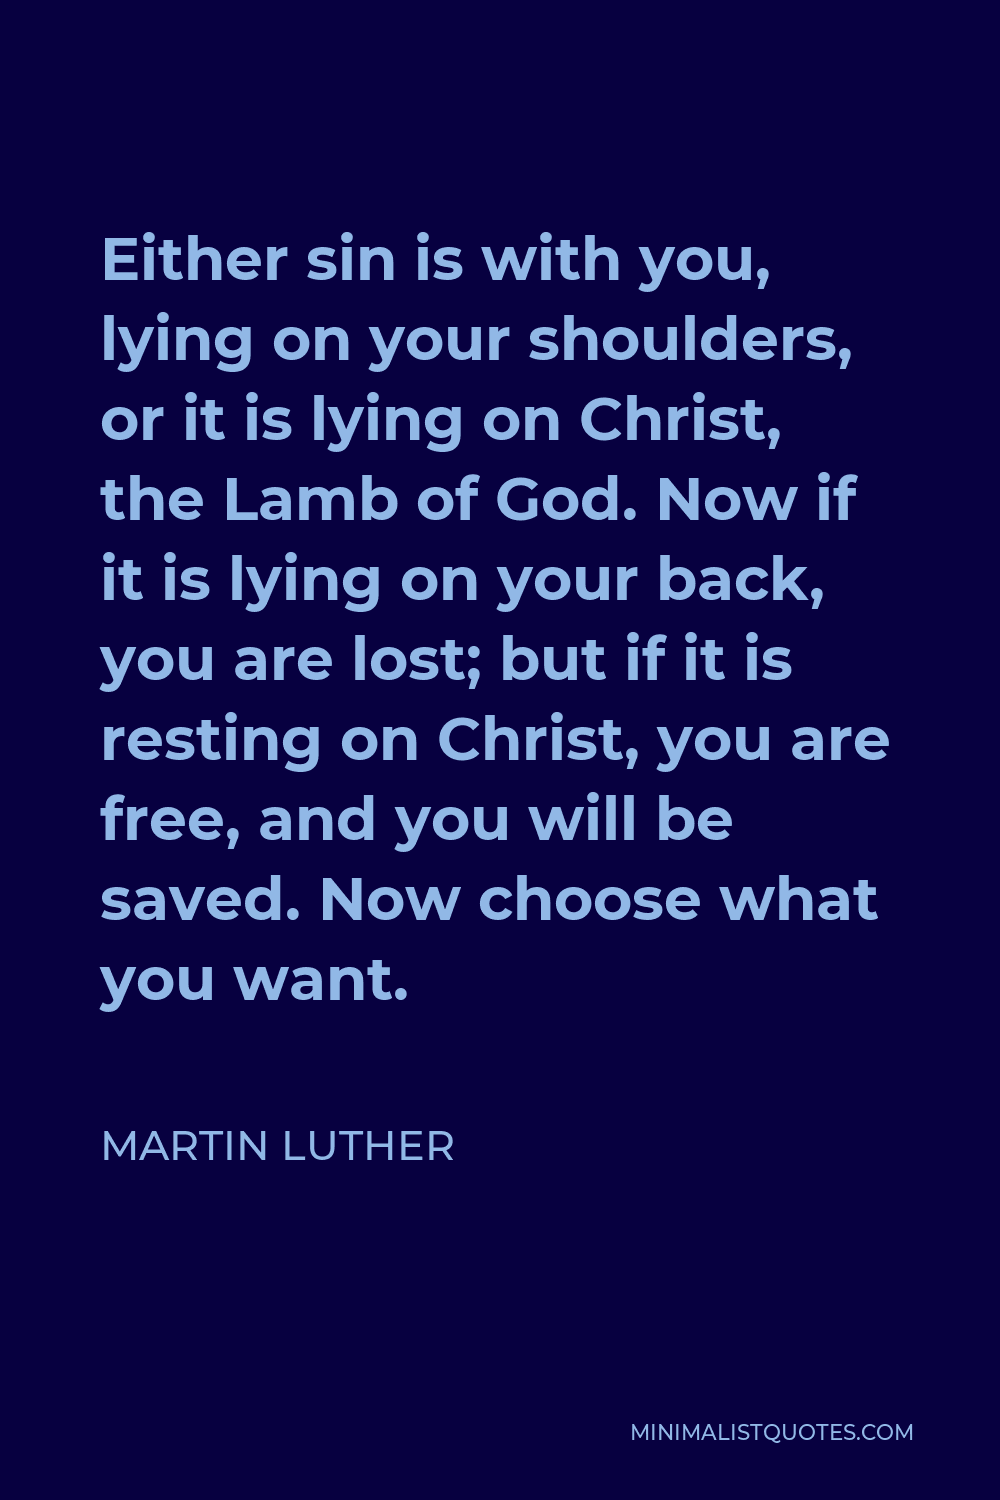 Martin Luther Quote - Either sin is with you, lying on your shoulders, or it is lying on Christ, the Lamb of God. Now if it is lying on your back, you are lost; but if it is resting on Christ, you are free, and you will be saved. Now choose what you want.